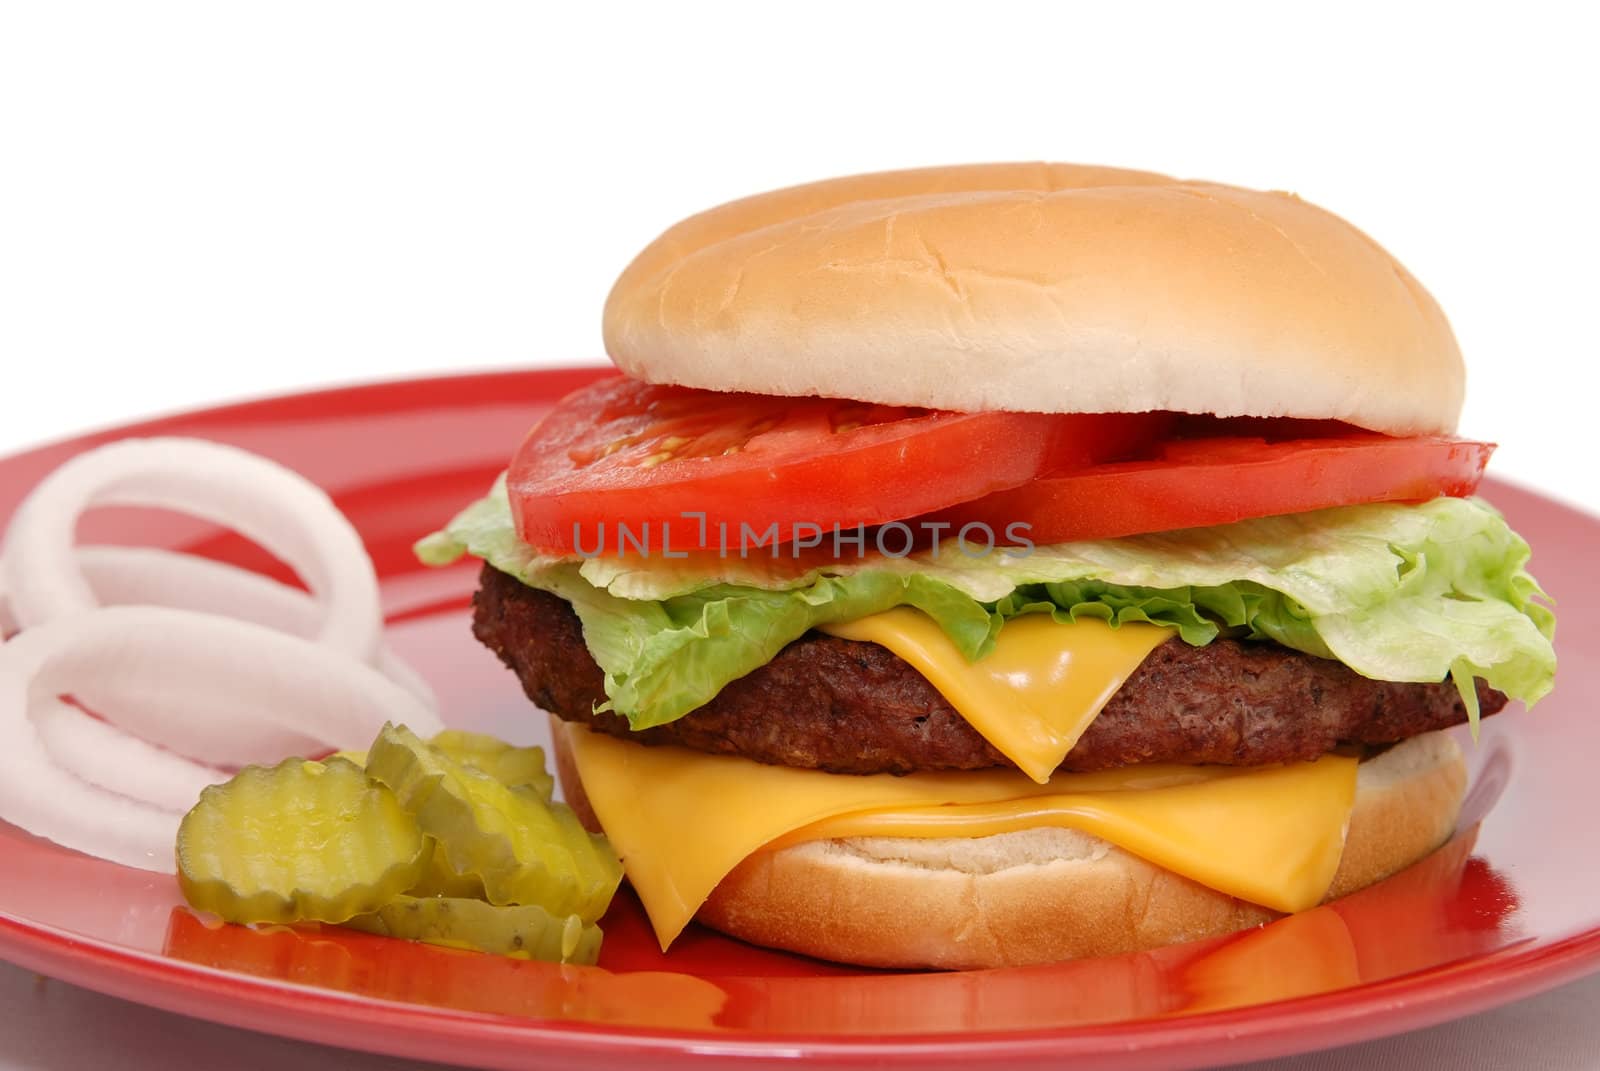 Cheeseburger with pickles and onions on red plate.  Isolated on white background.